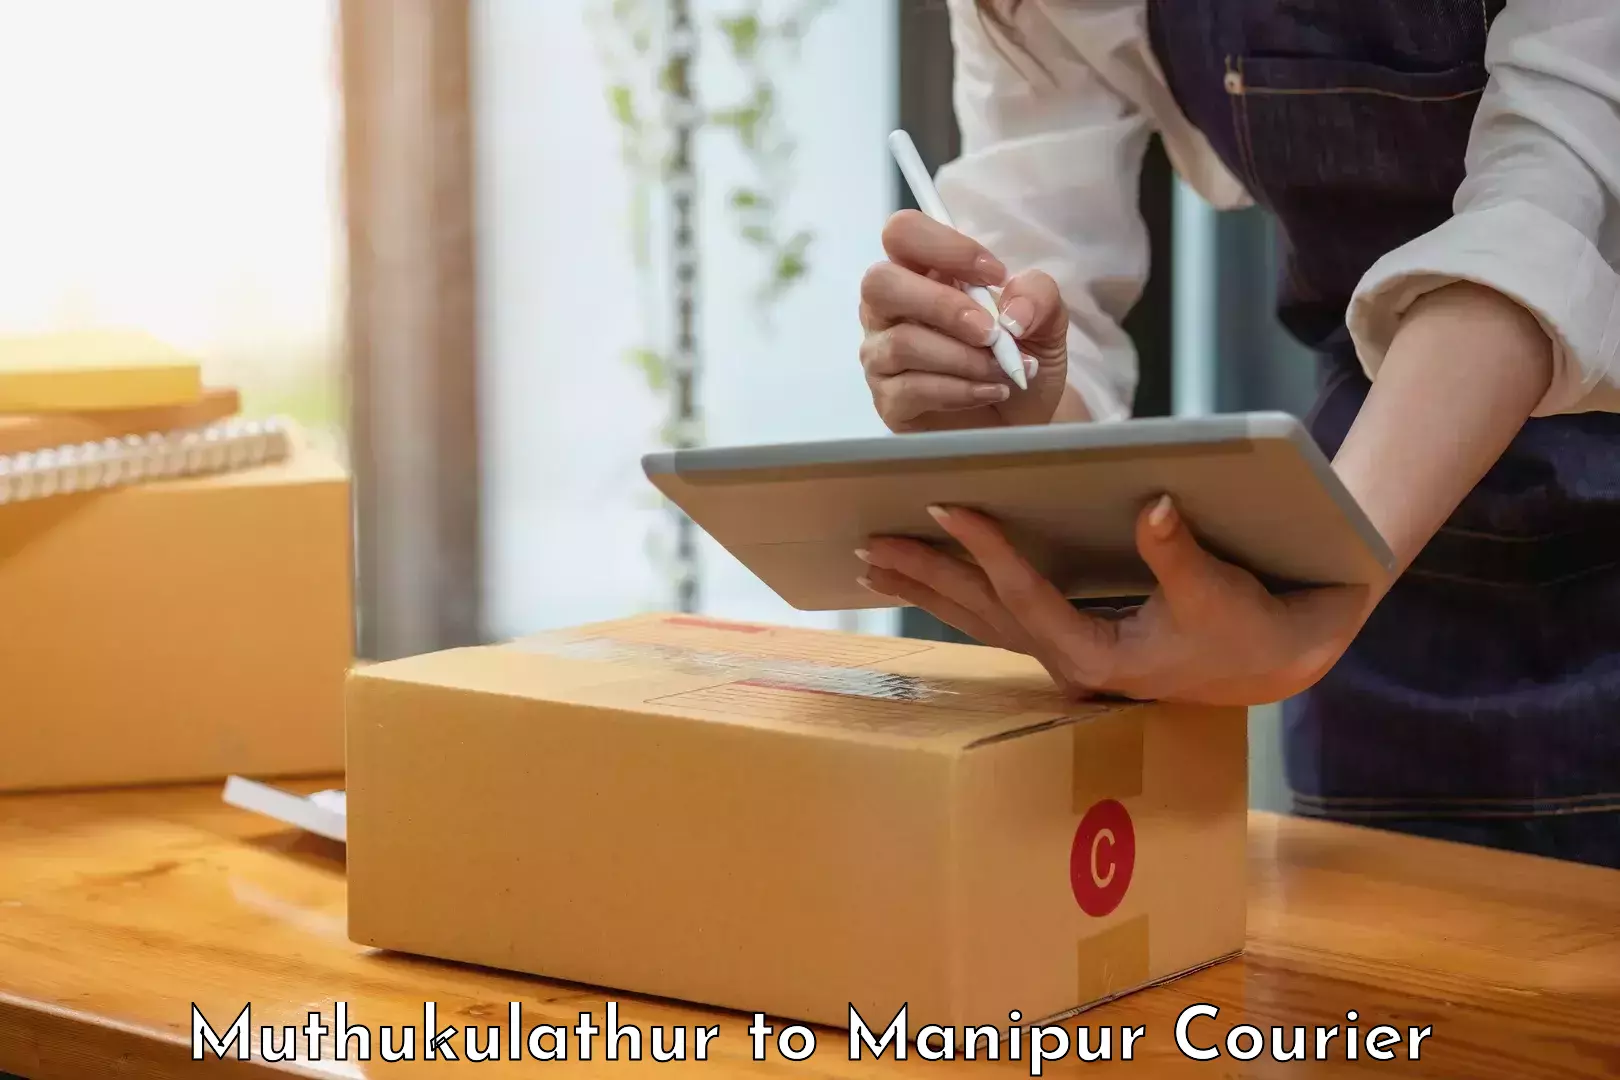 State-of-the-art courier technology Muthukulathur to Thoubal